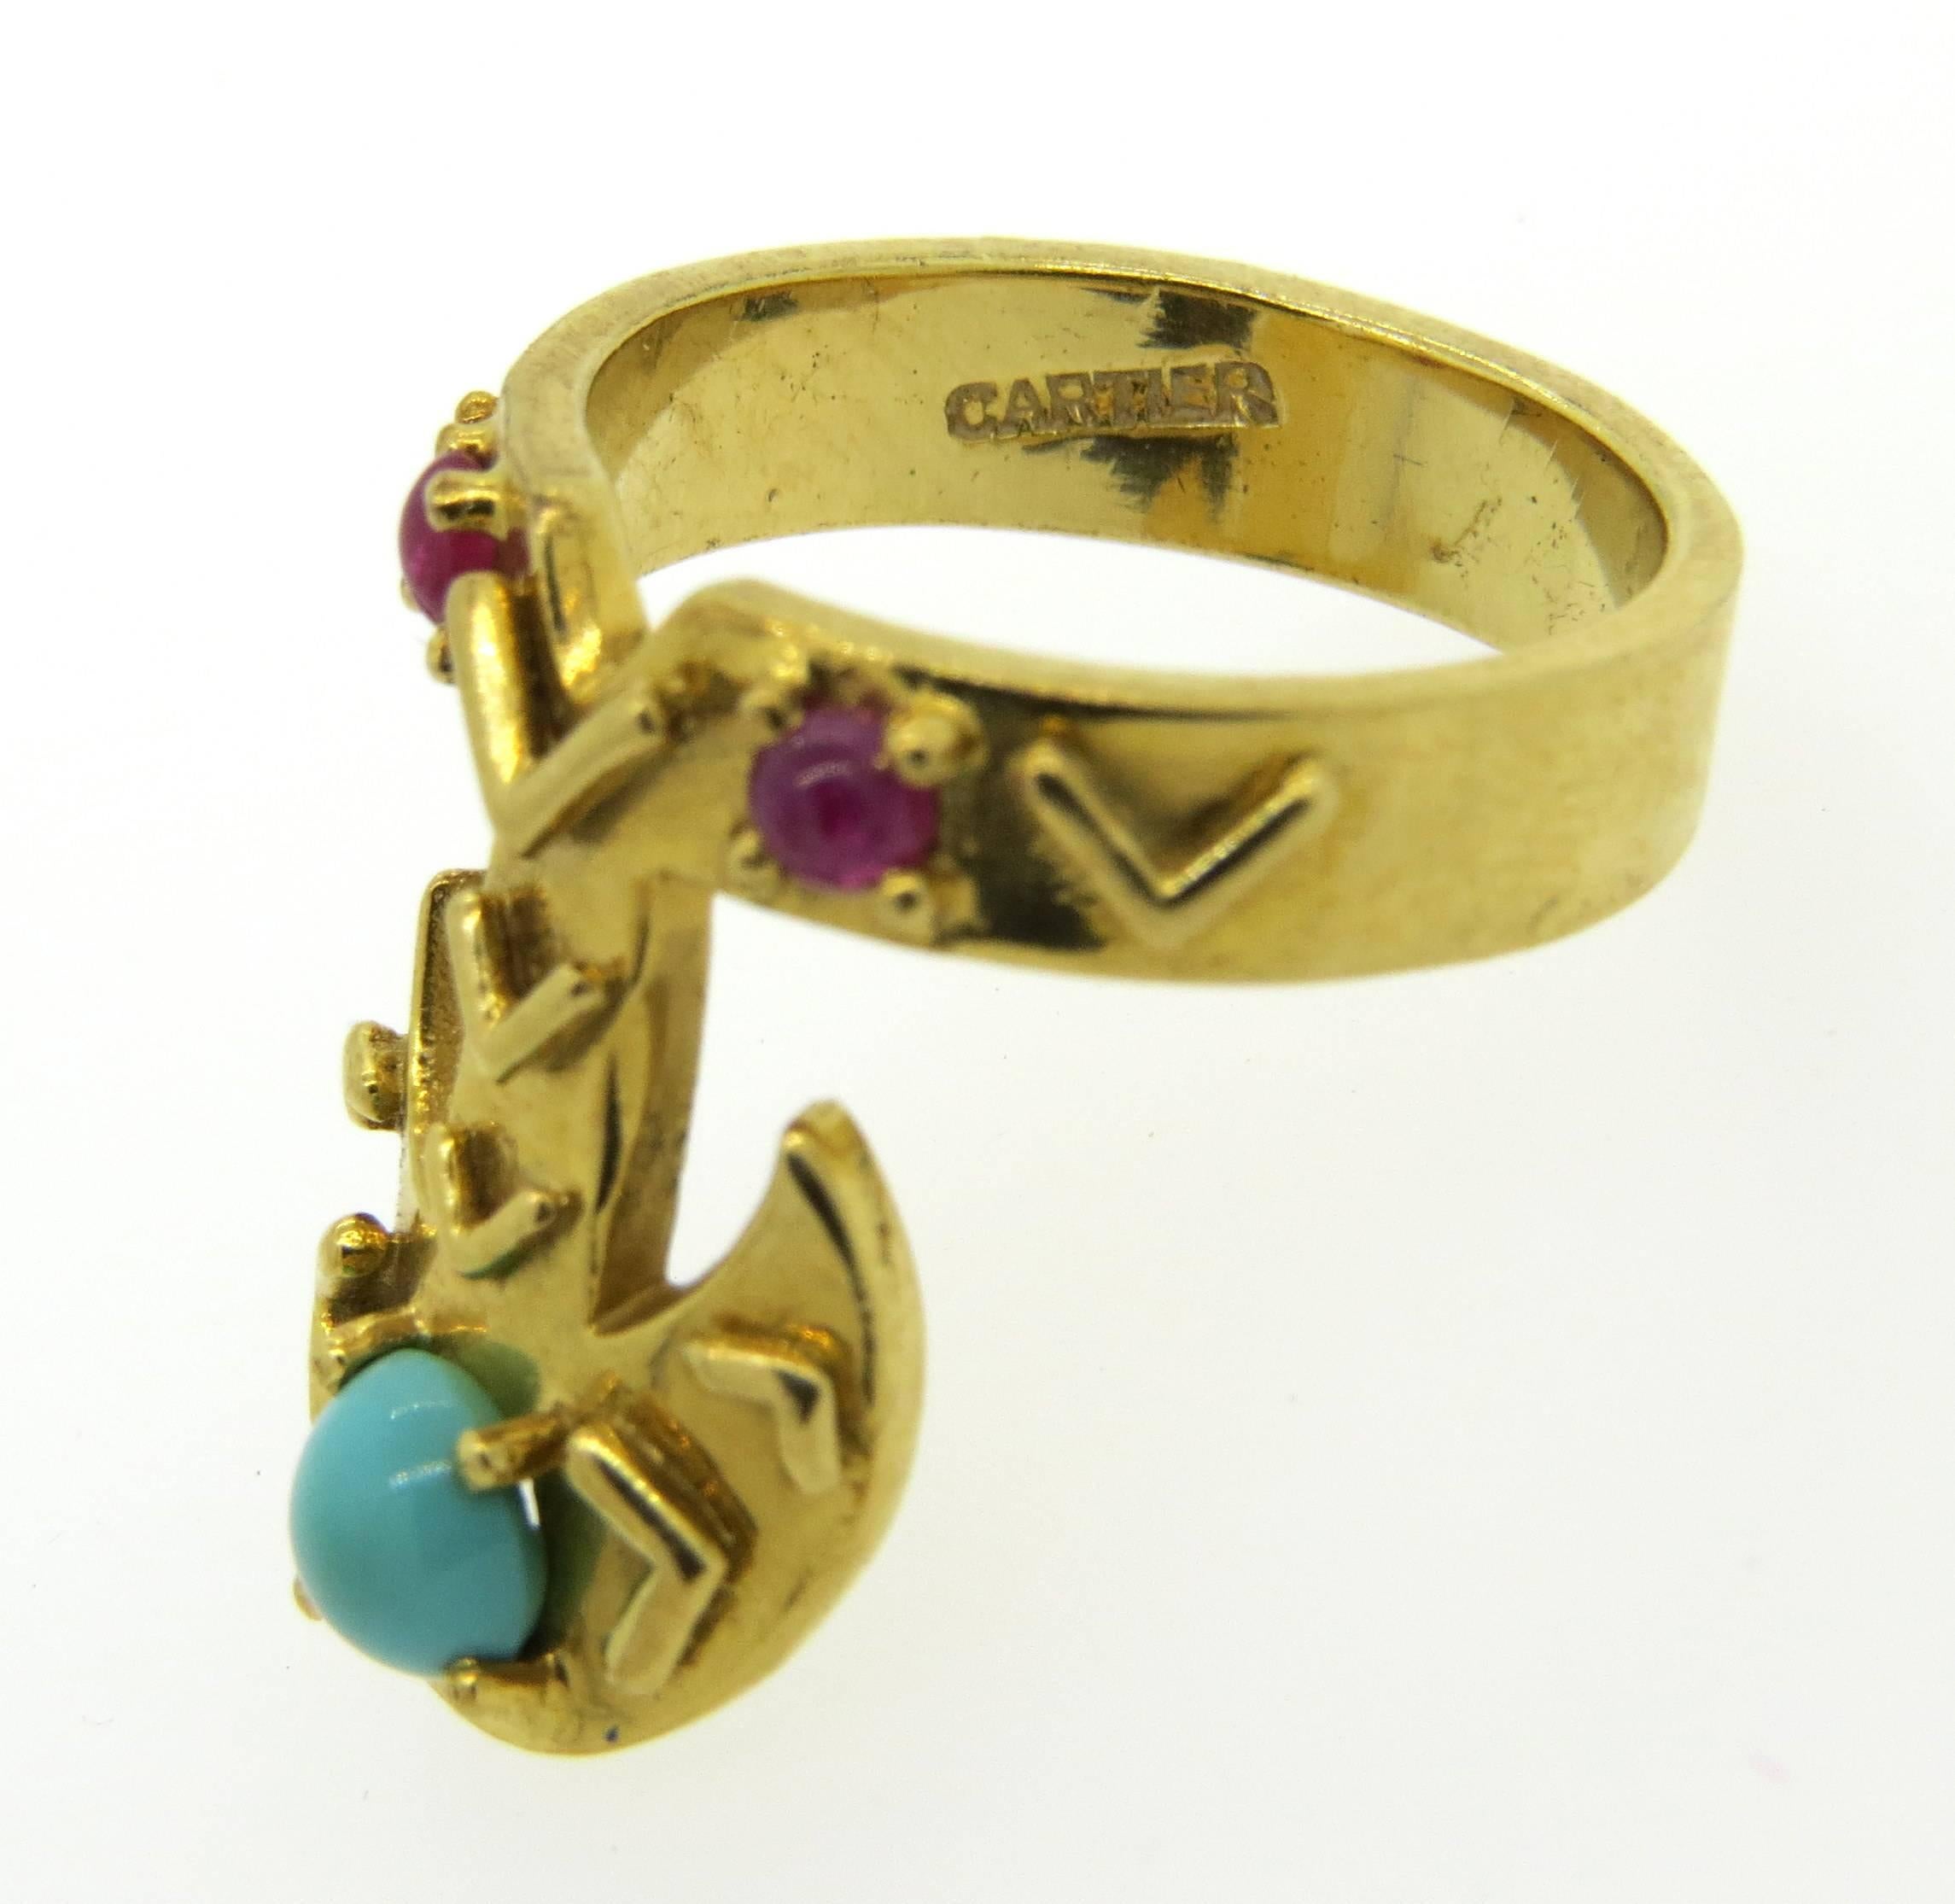 This whimsical ring by Cartier is crafted in 18K gold featuring turquoise and rubies. Ring size 6, top measures 20.5mm at widest point. Marked Cartier, 18K. Ring weighs 9.7 grams. 